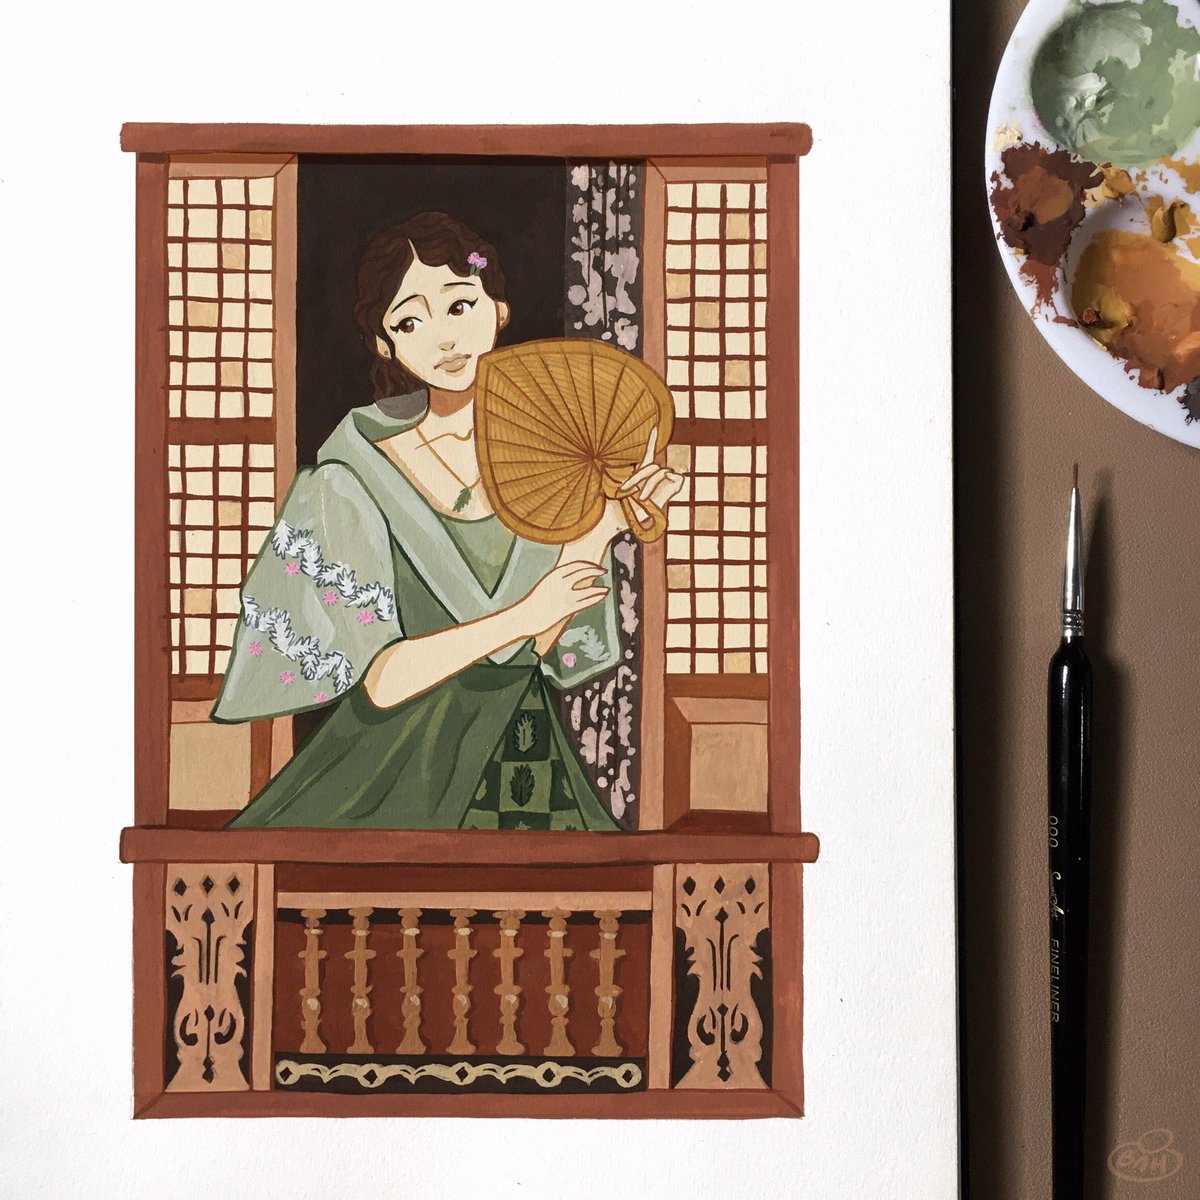 「wow i miss painting with gouache 」|Raya @ uniのイラスト